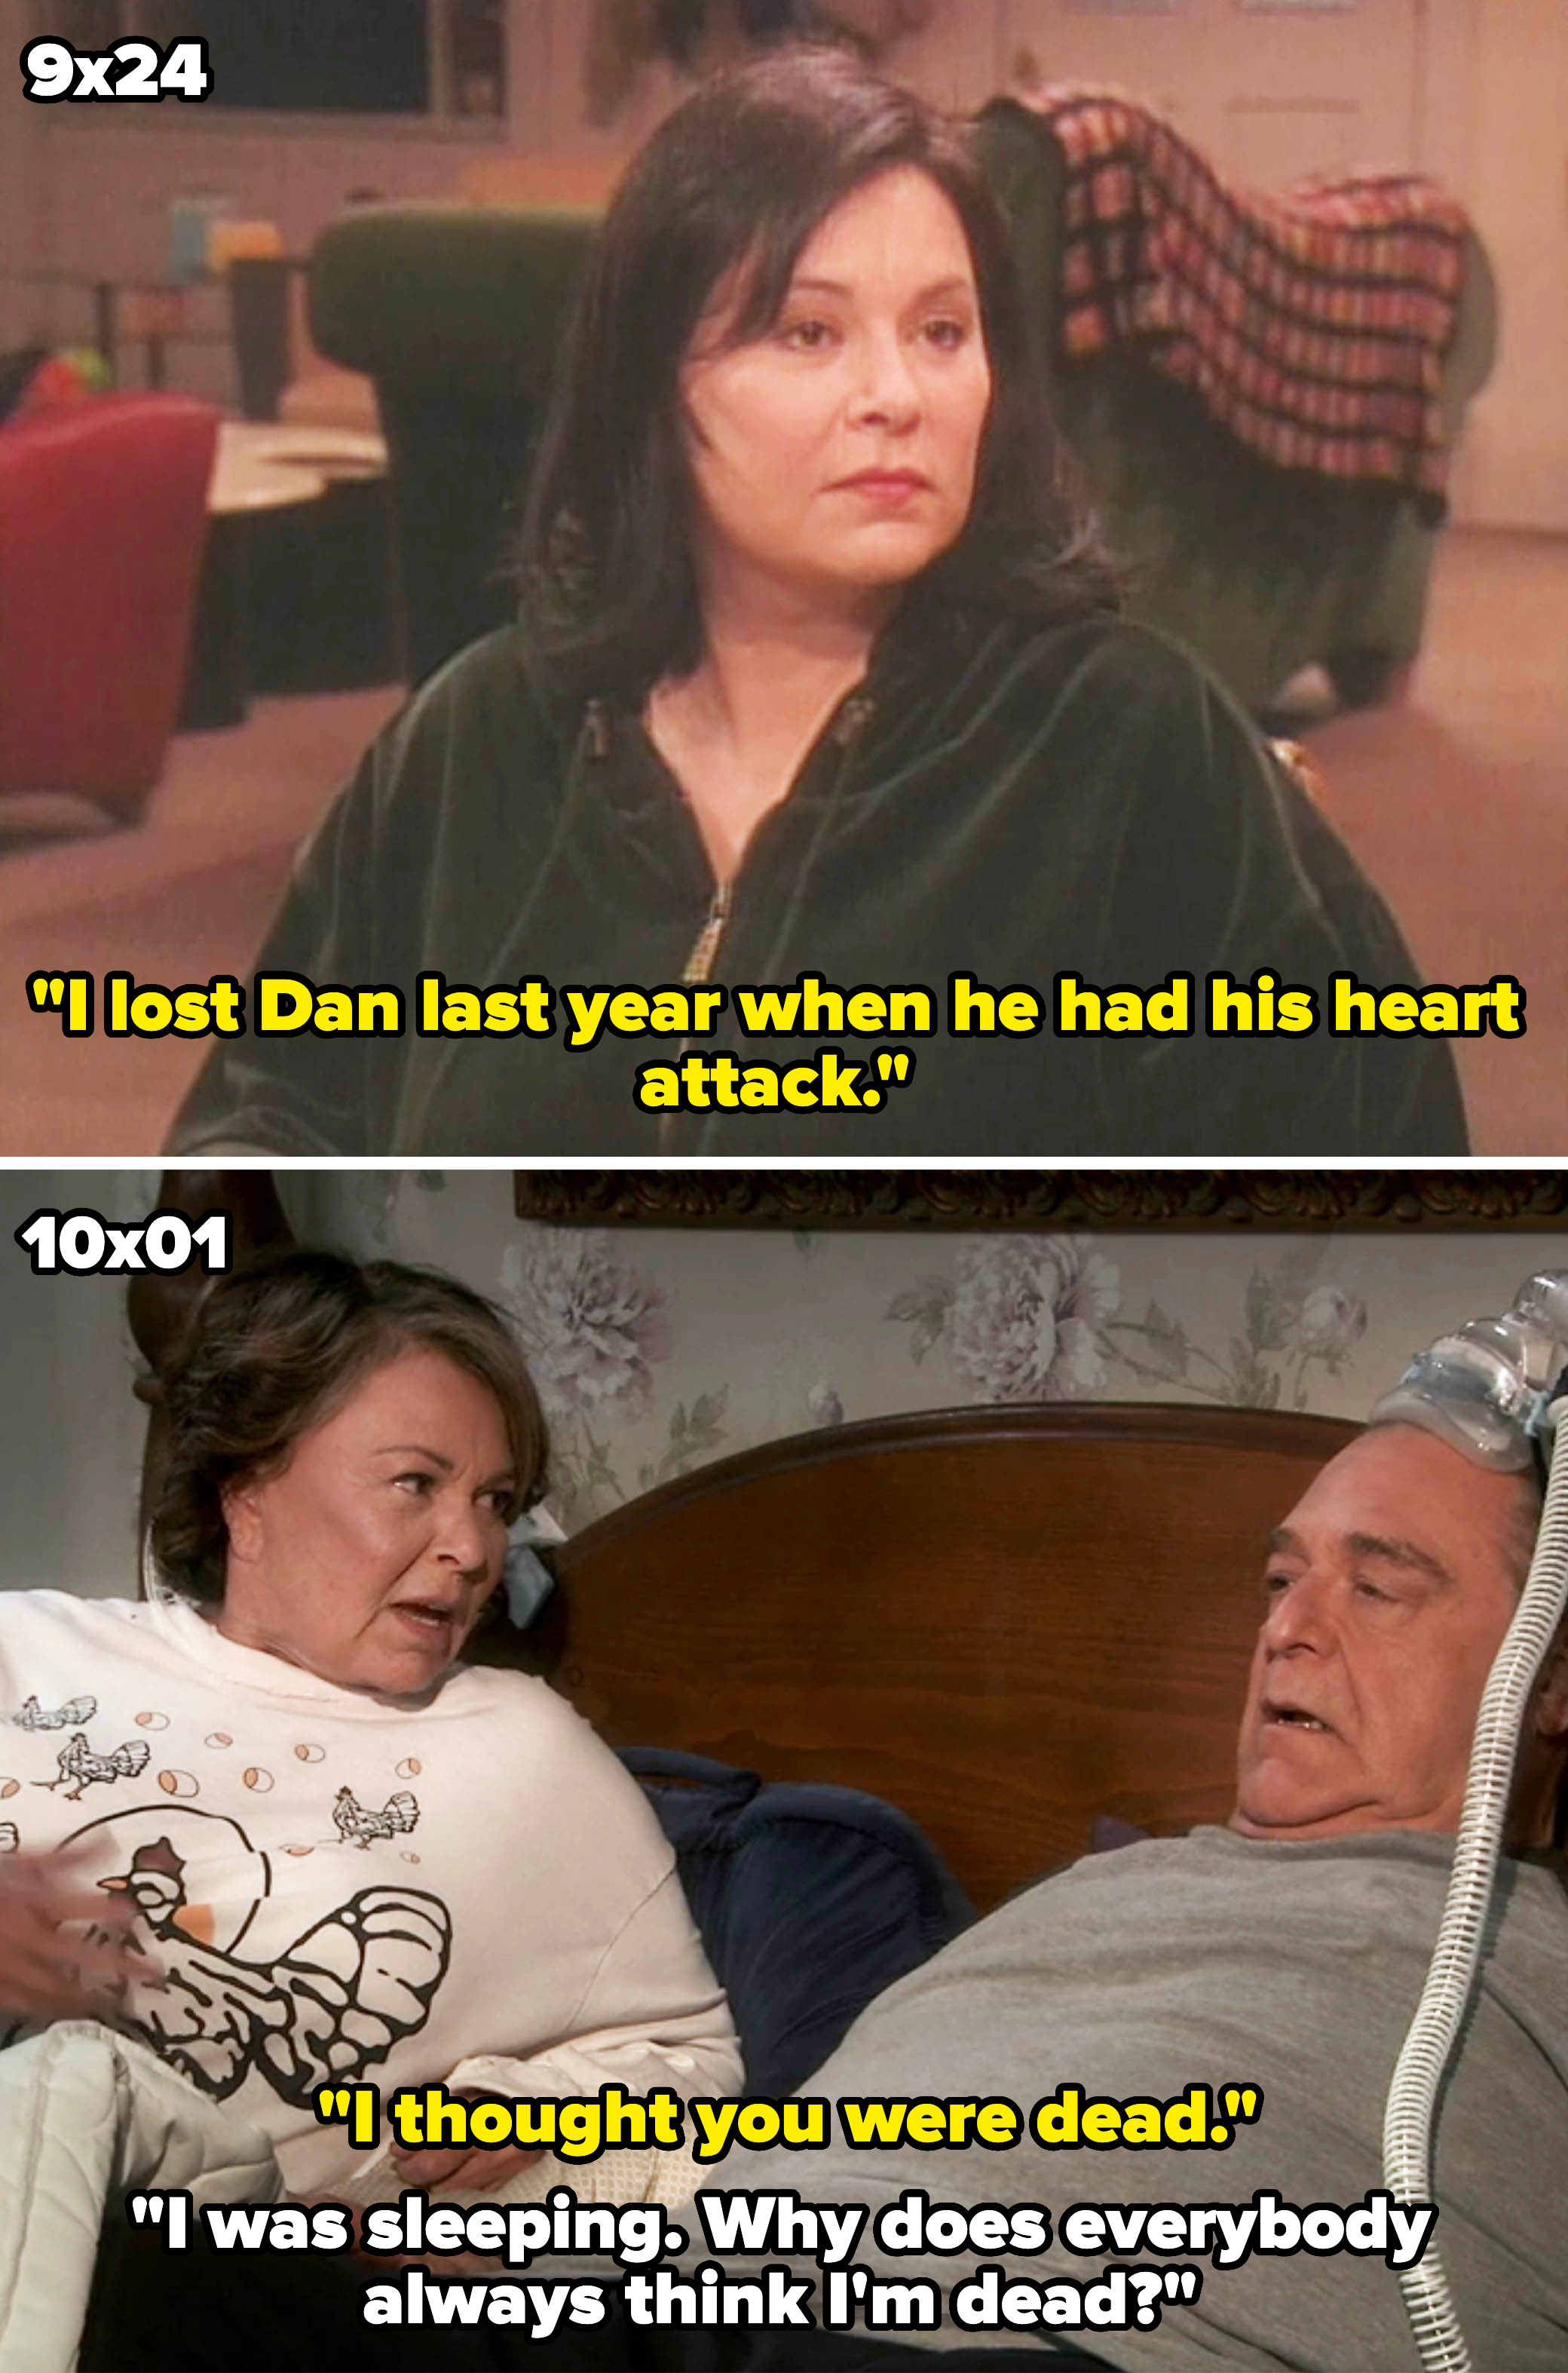 Two scenes from a TV show featuring Roseanne Conner in casual clothing, sitting indoors and lying beside a character in a hospital bed